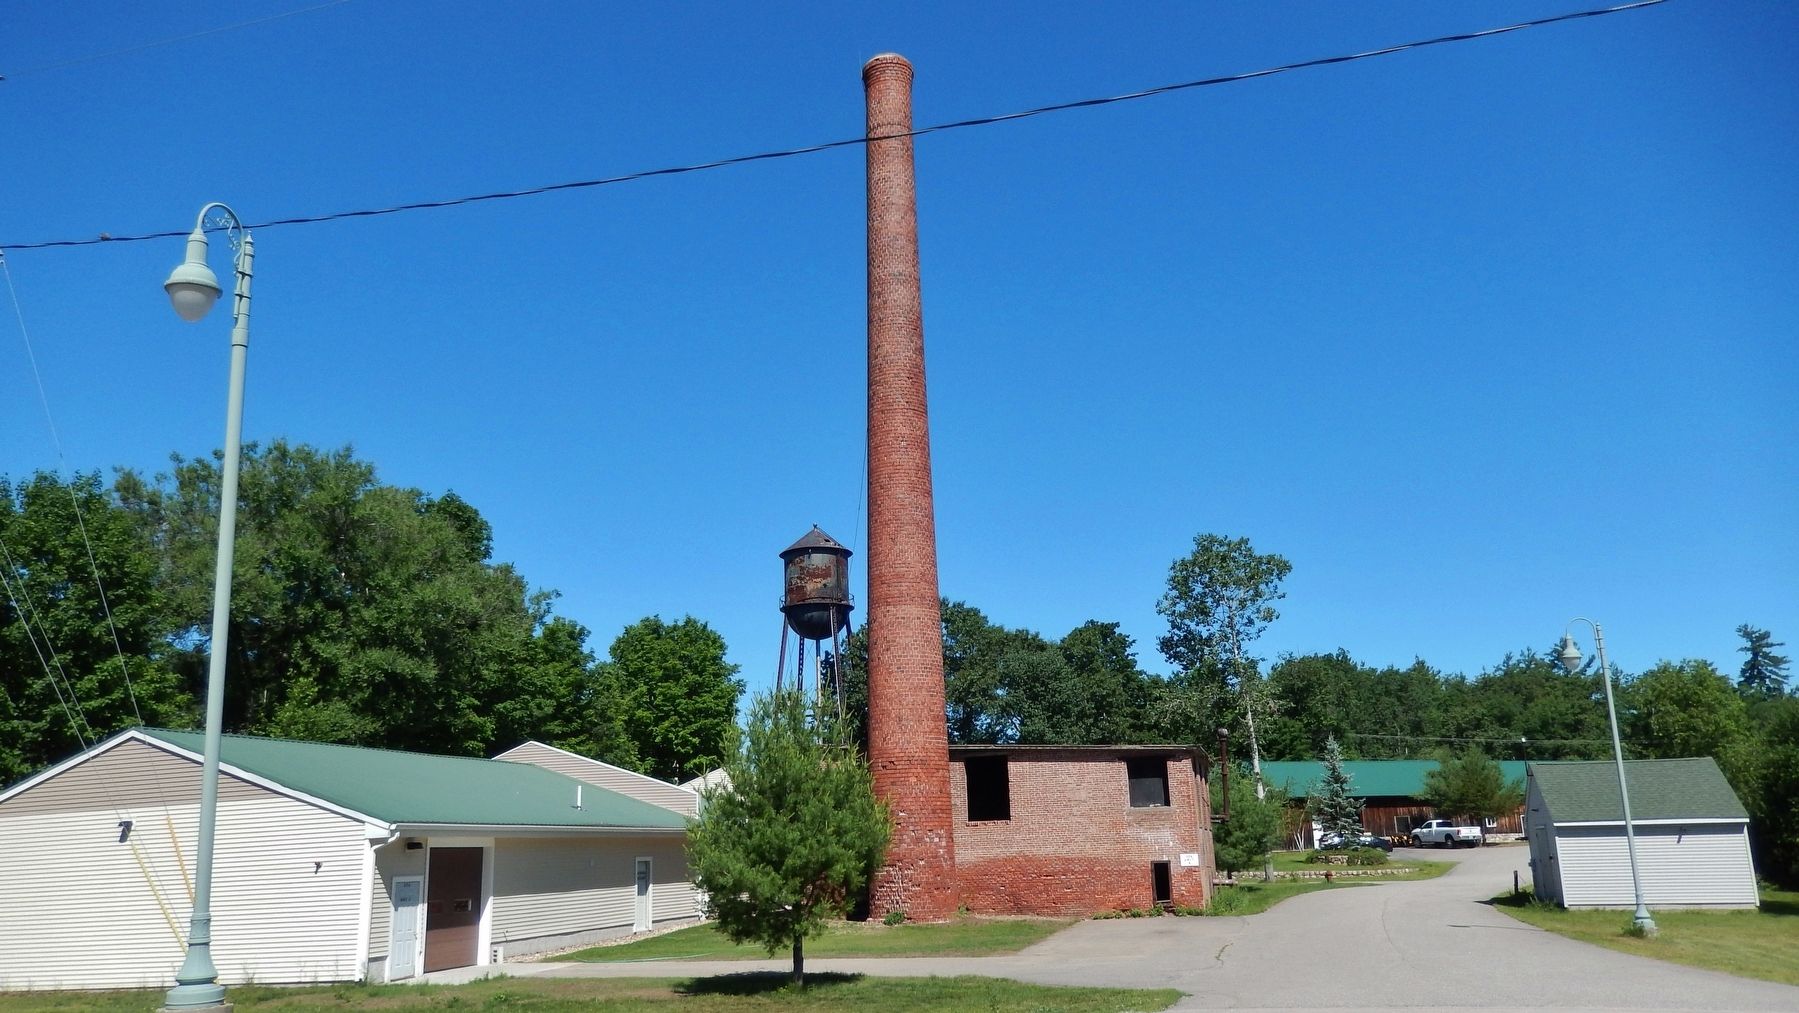 Spaulding & Frost Cooperage (<i>located just south of marker</i>) image. Click for full size.